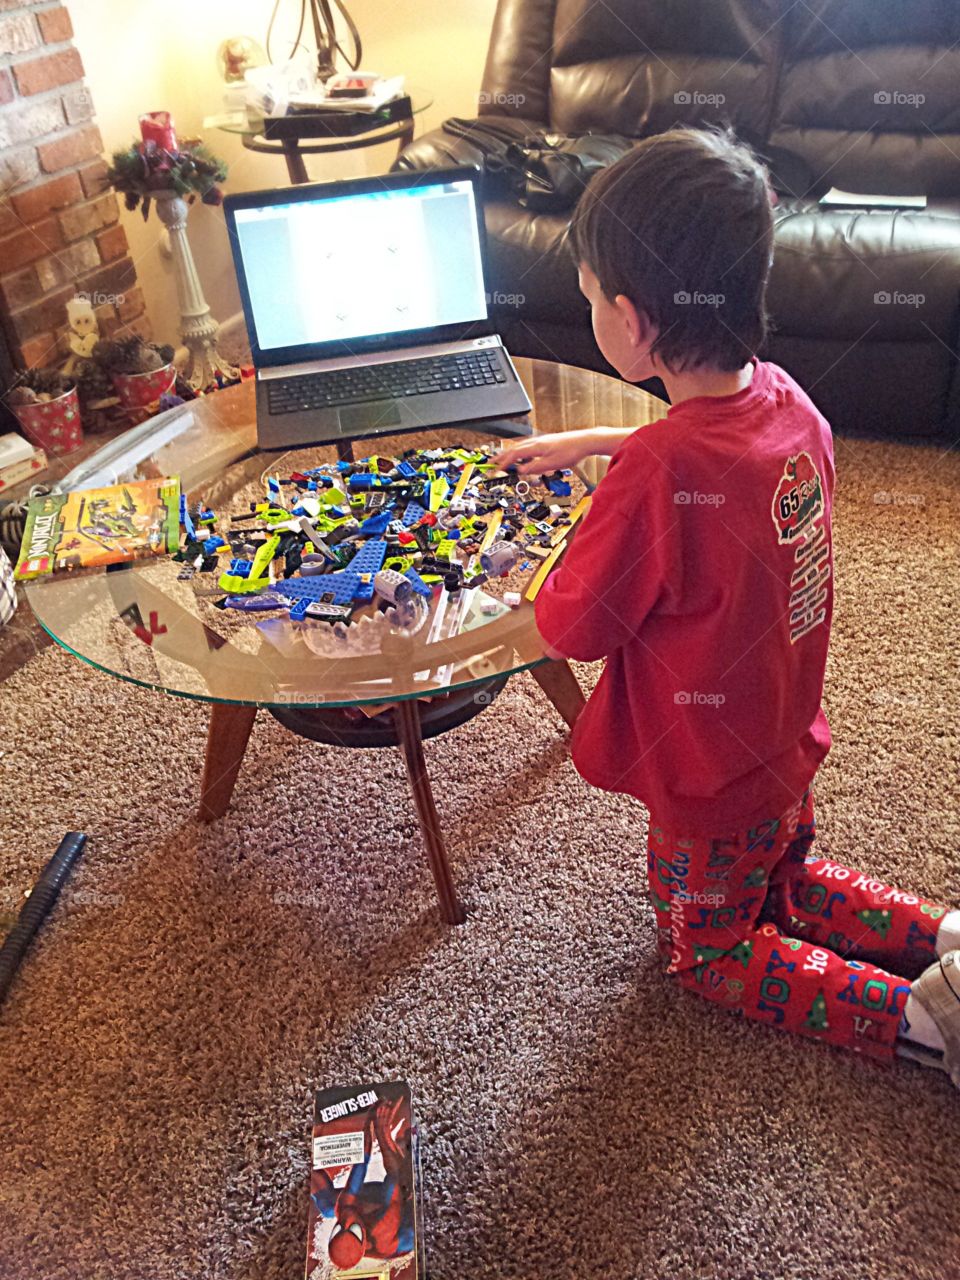 builder. son with Cystic fibrosis home sick.  we discovered building instructions on Lego.com